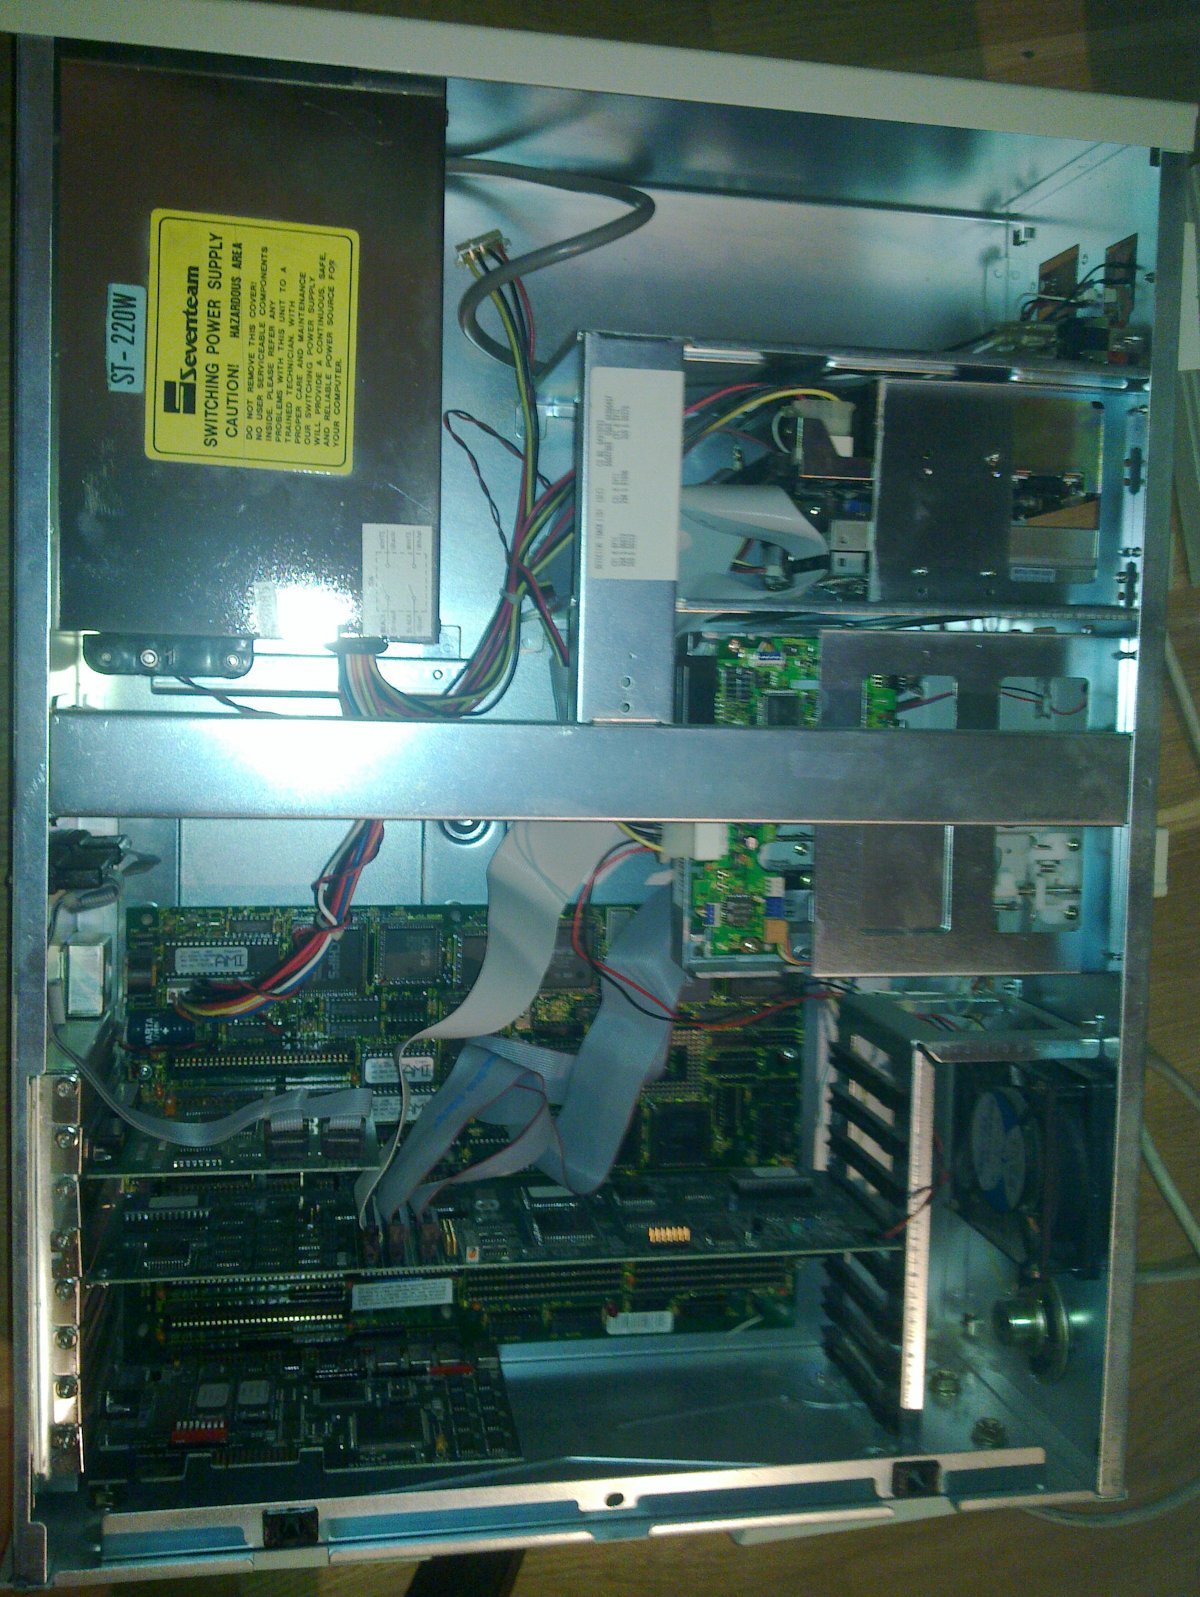 Inside the computer in the state it was found